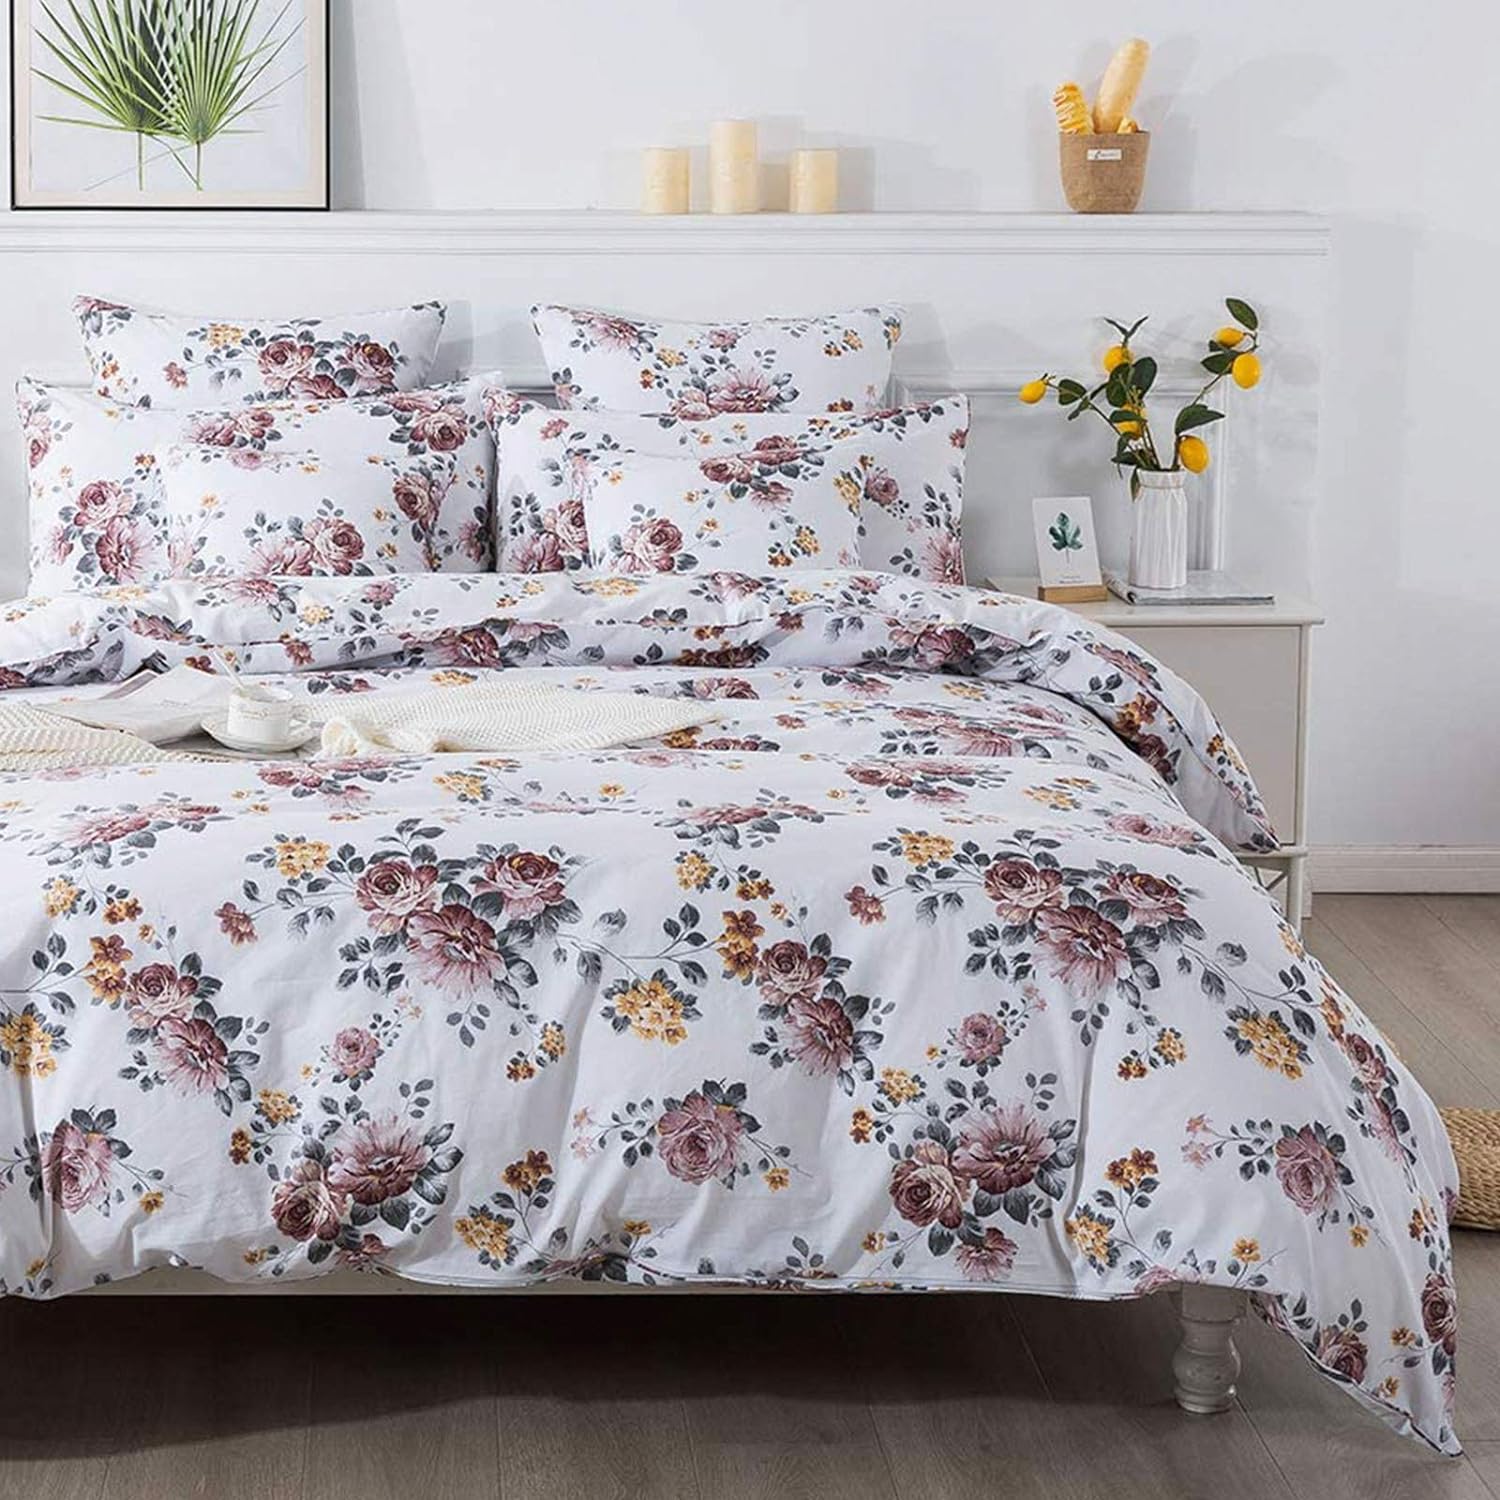 FADFAY Duvet Cover Set Twin Elegant White Floral Farmhouse Bedding 100% Brushed Cotton Ultra Soft Comforter Cover Set with Zipper Closure 3Pcs, 1duvet Cover & 2pillowcases,Twin Size